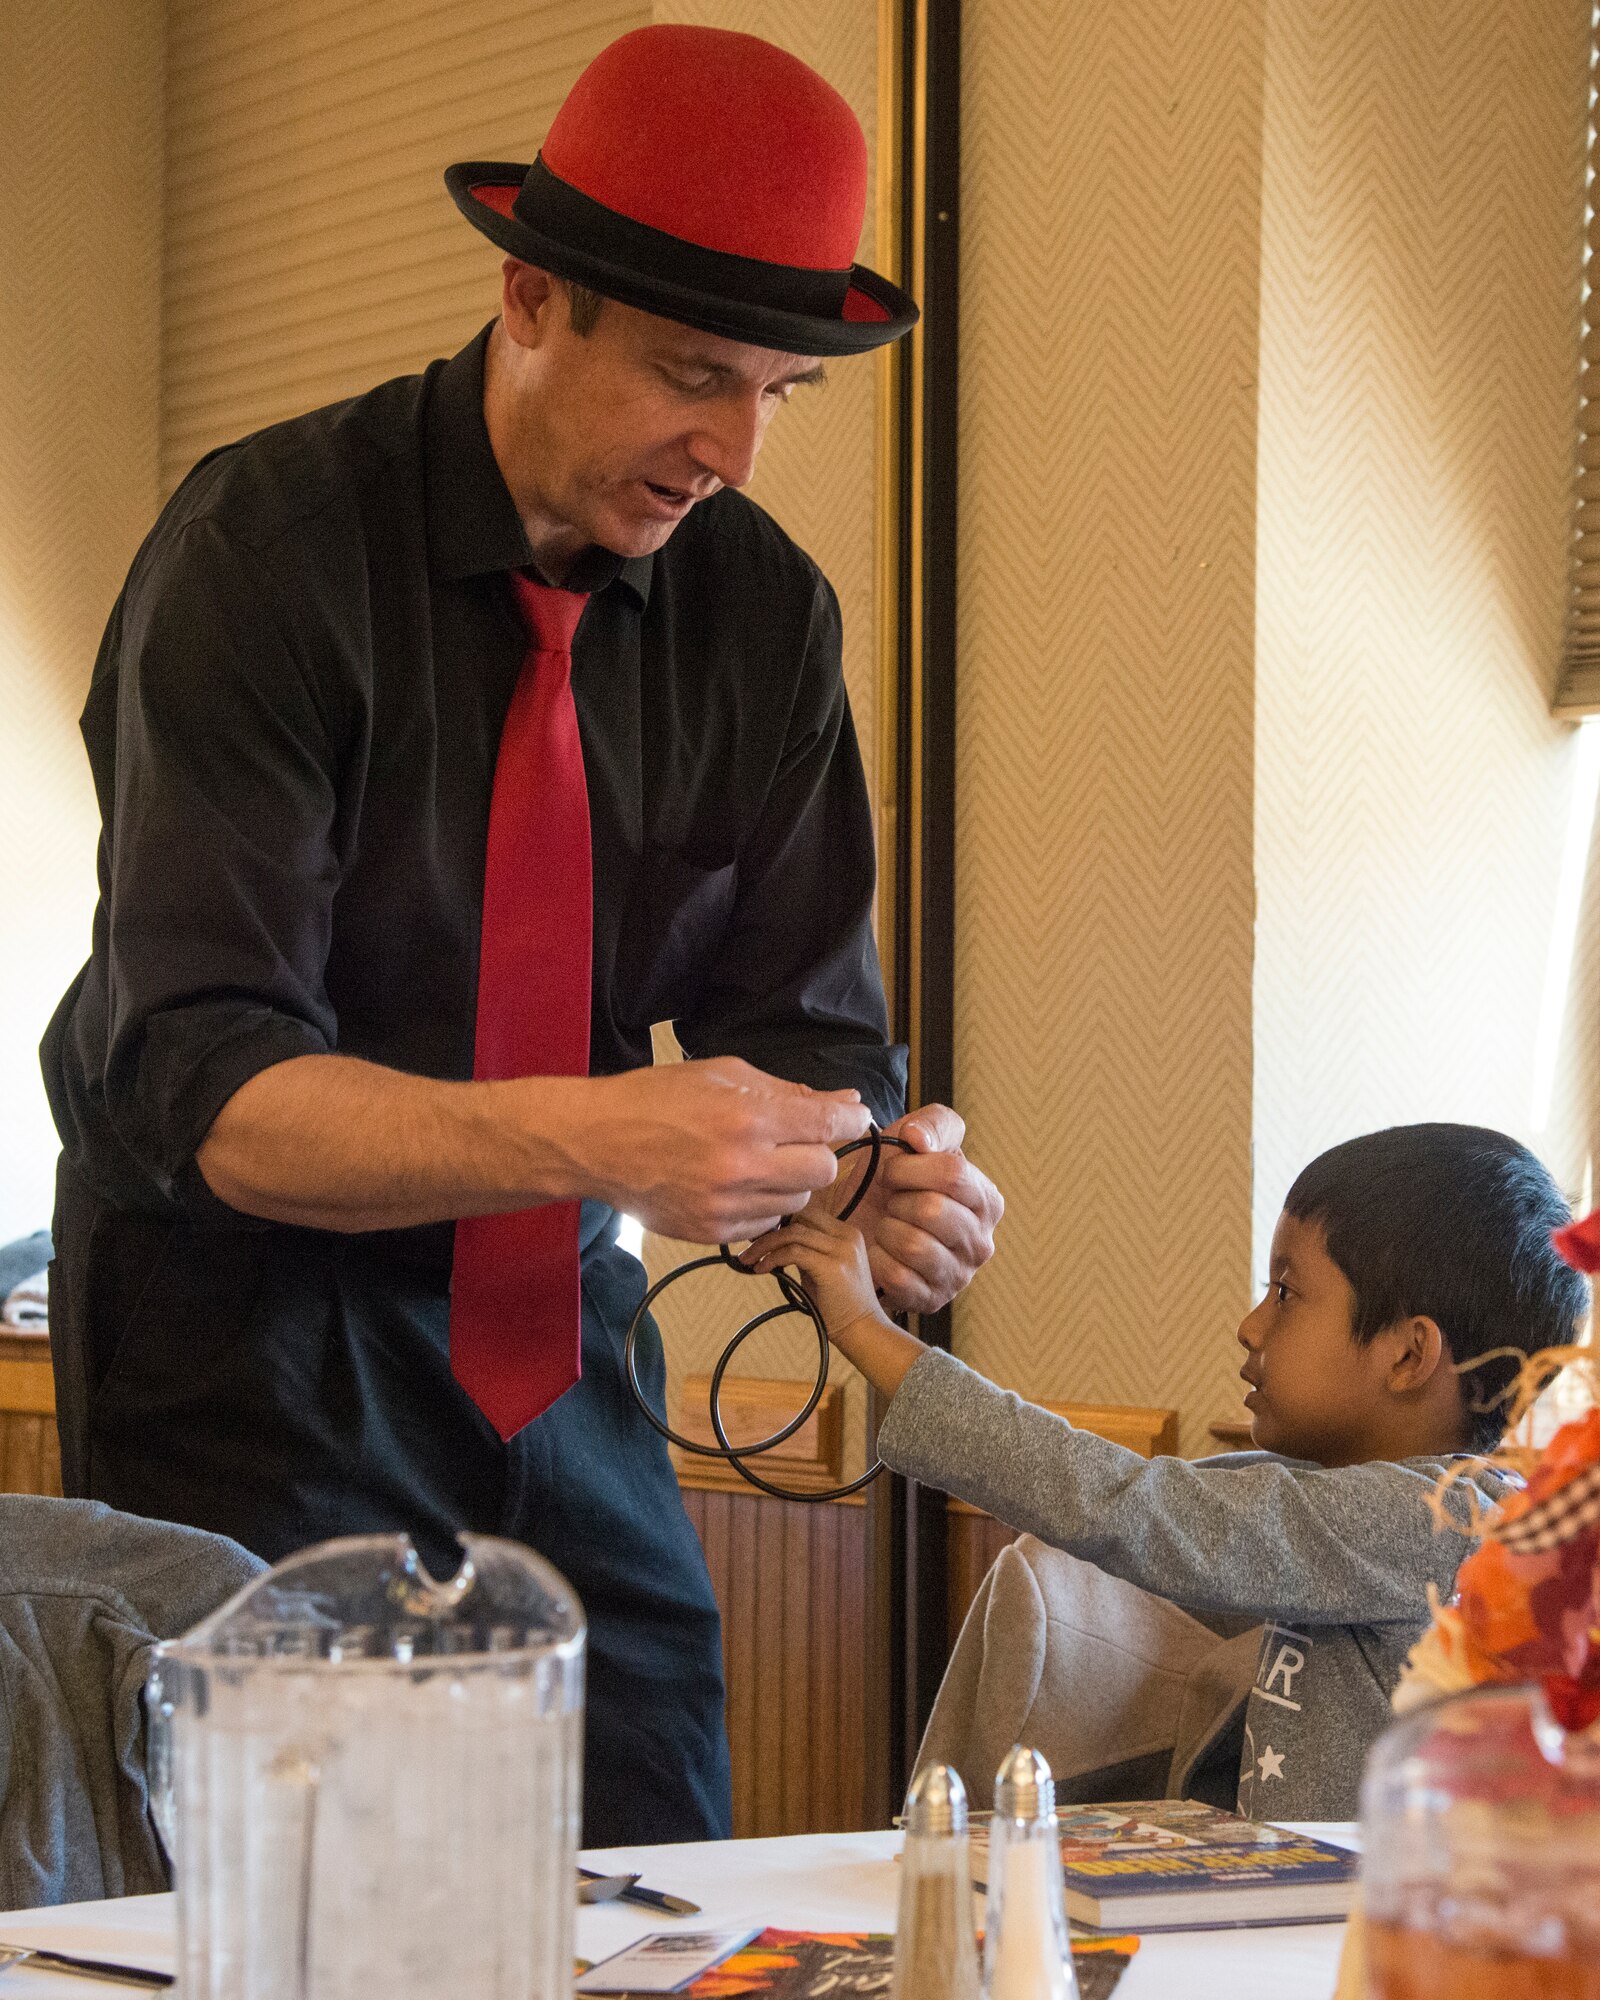 Tall Pall the Magician entertains Liam Jimenez, 6, at the Thanksgiving luncheon Oct. 10 at the Mountain View Club. This lunchoen in years past was the traditional event scheduled for the families of deployed members, but was opened this year to the rest of Team Kirtland to increase support for deployed families. Patrons were treated to a traditional Thanksgiving lunch followed by entertainment from Tall Paul. (U.S. Air Force photo by Jim Fisher)